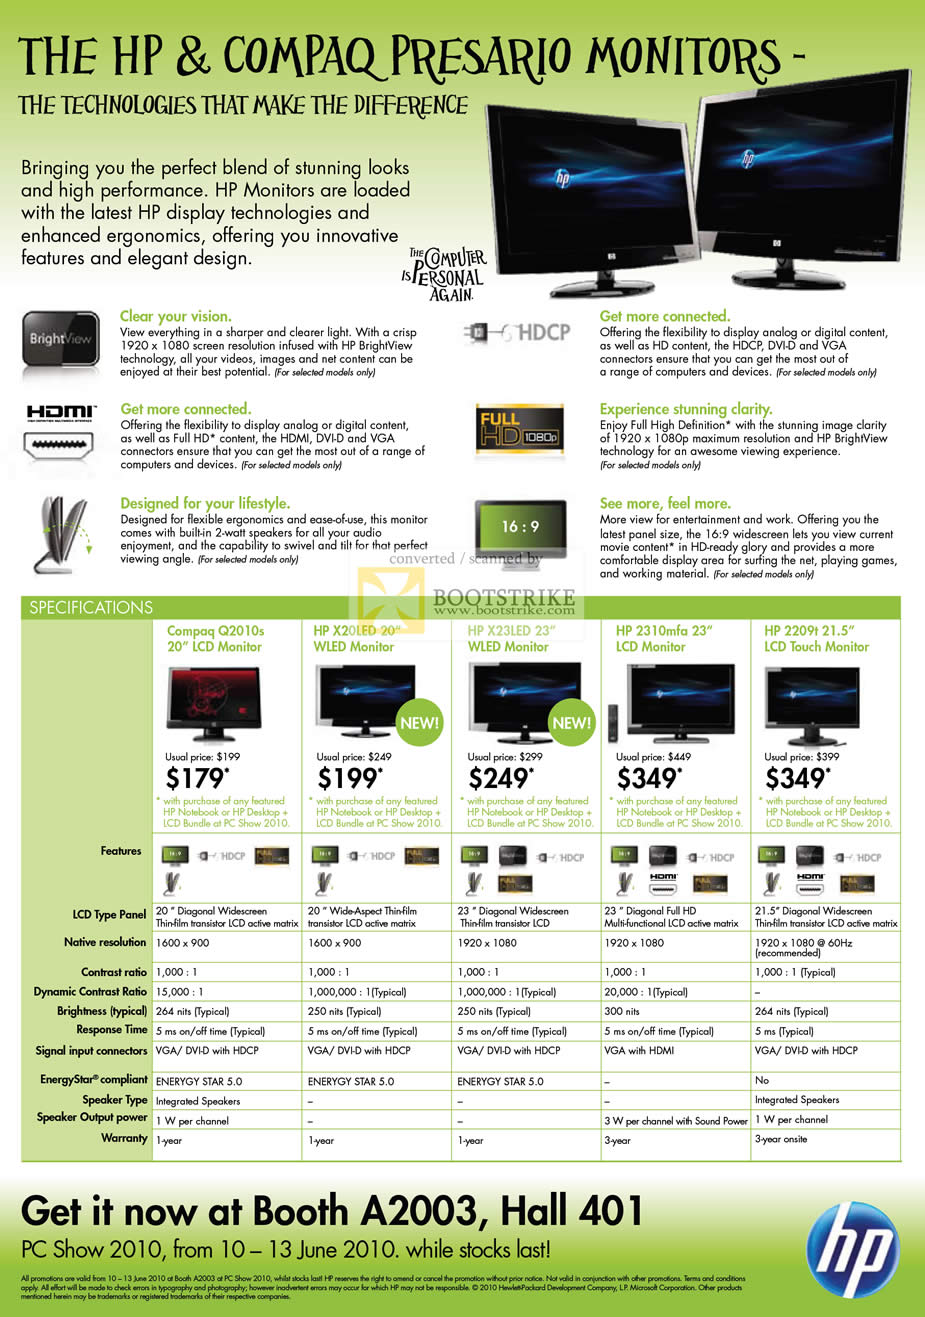 PC Show 2010 price list image brochure of HP Compaq WLED LCD Monitors Q2010s X20LED X23LED 2310mfa 2209t Touch